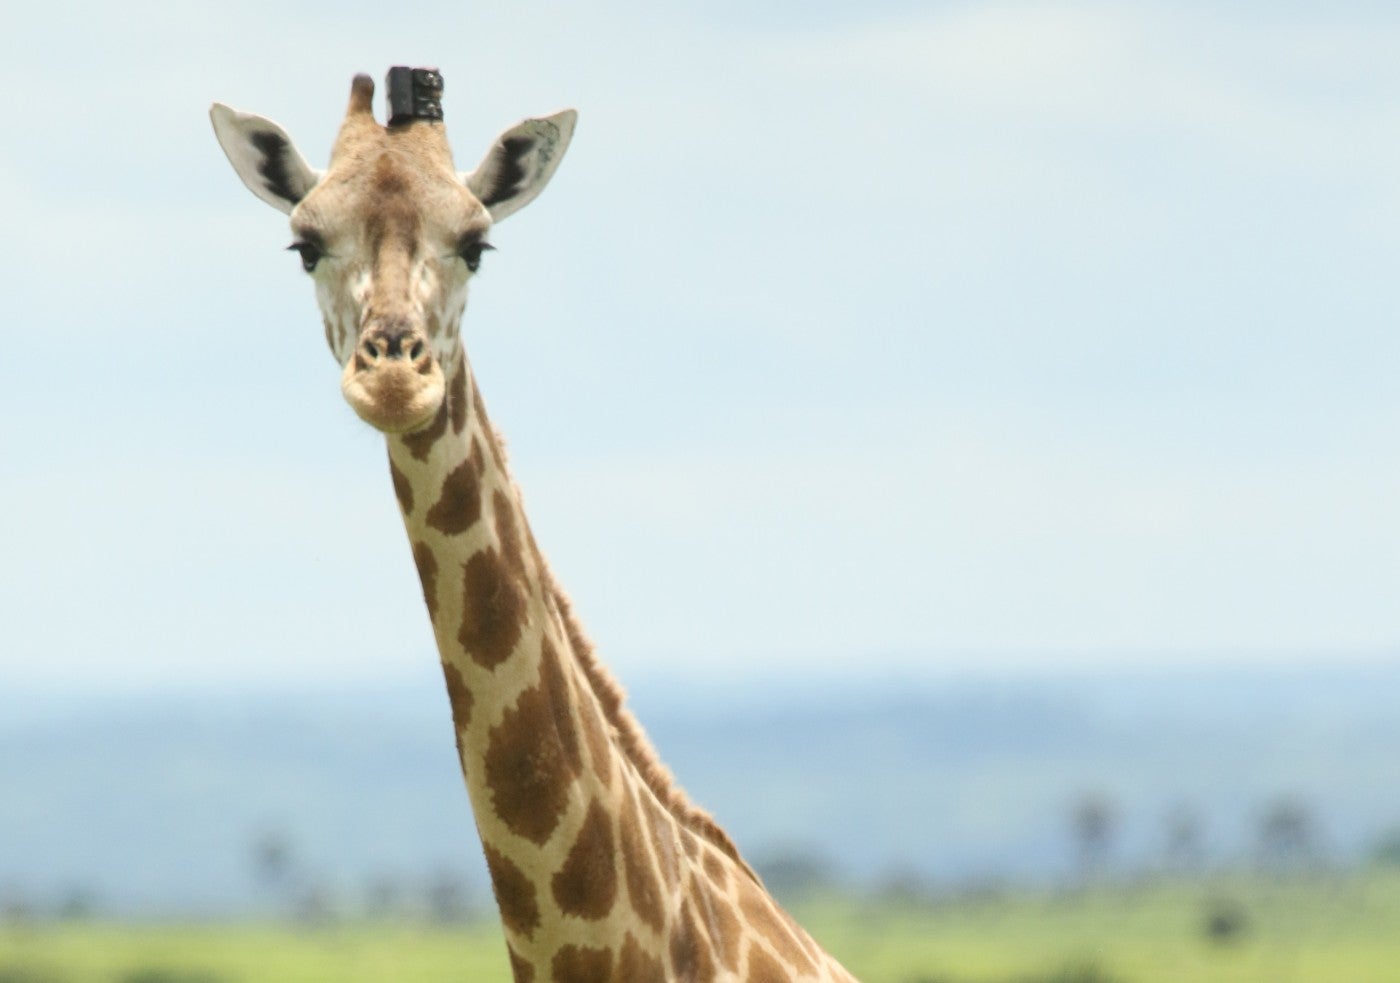 A giraffe wearing a specially designed GPS tracking unit attached to its ossicone (horn-like protrusion))